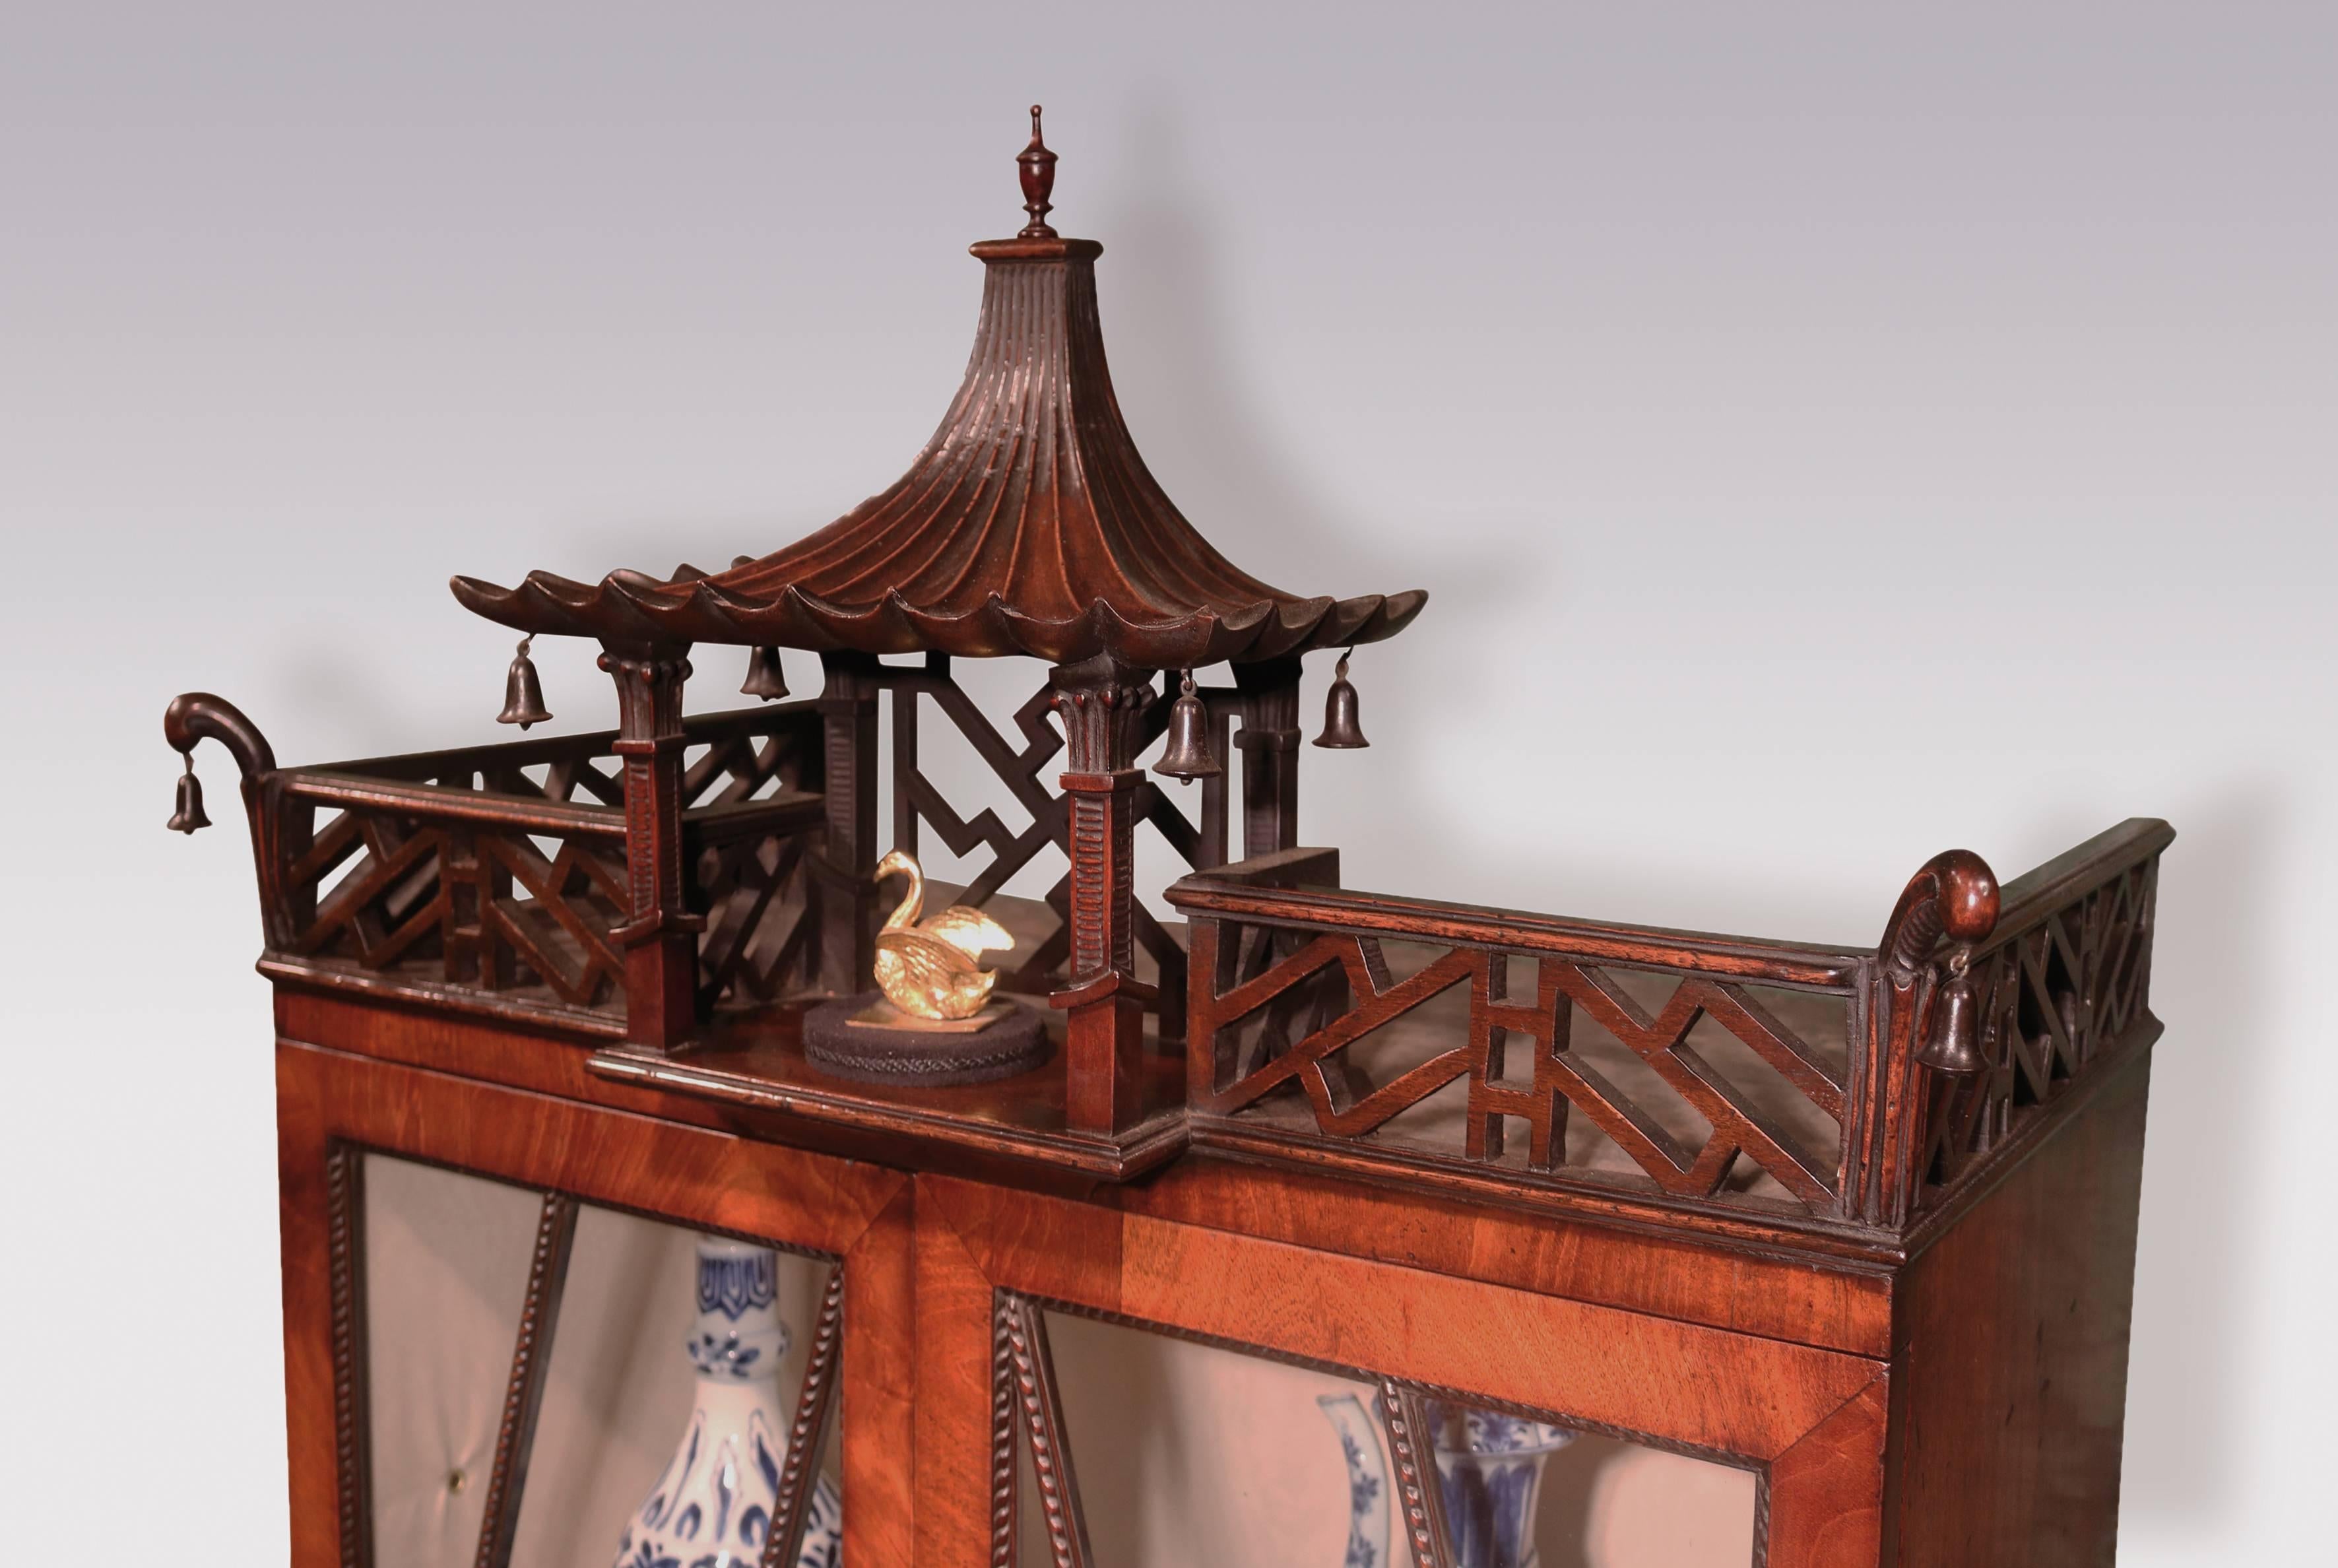 An unusual Chippendale design figured mahogany display bookcase of attractive small proportions, having pierced fretwork carved cornice with central gadrooned pagoda, above unusual angled gadrooned glazed doors, with carved gadrooned lower section